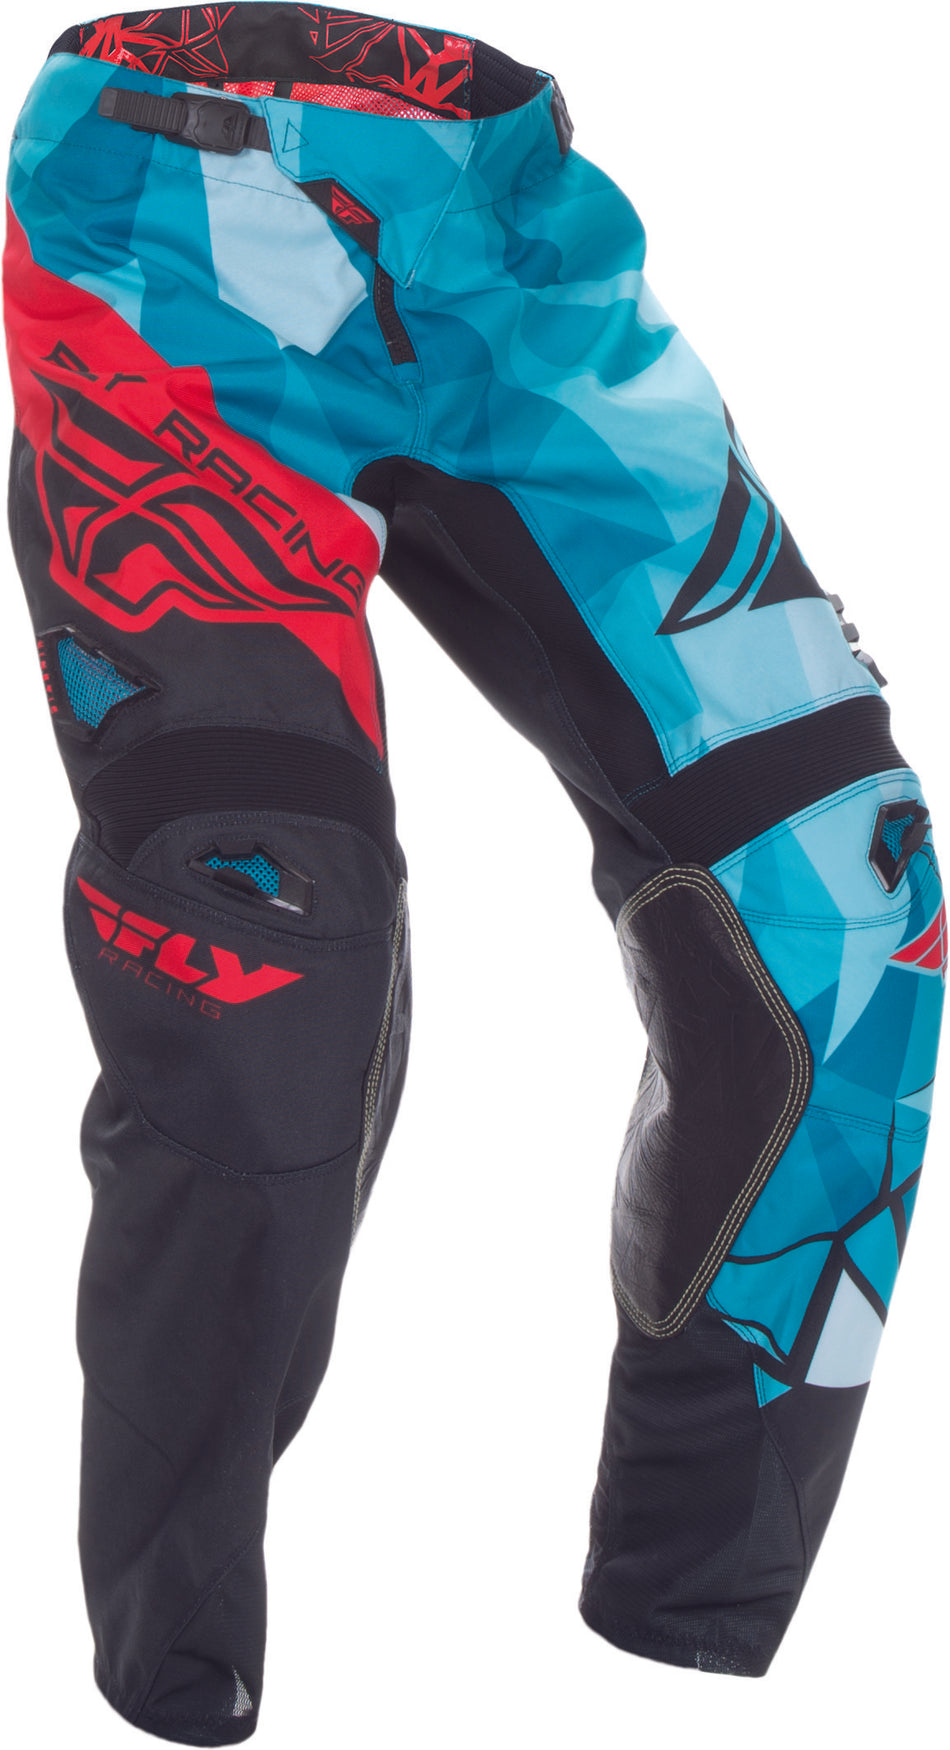 FLY RACING Kinetic Crux Pant Teal/Red Sz 28s 370-53928S